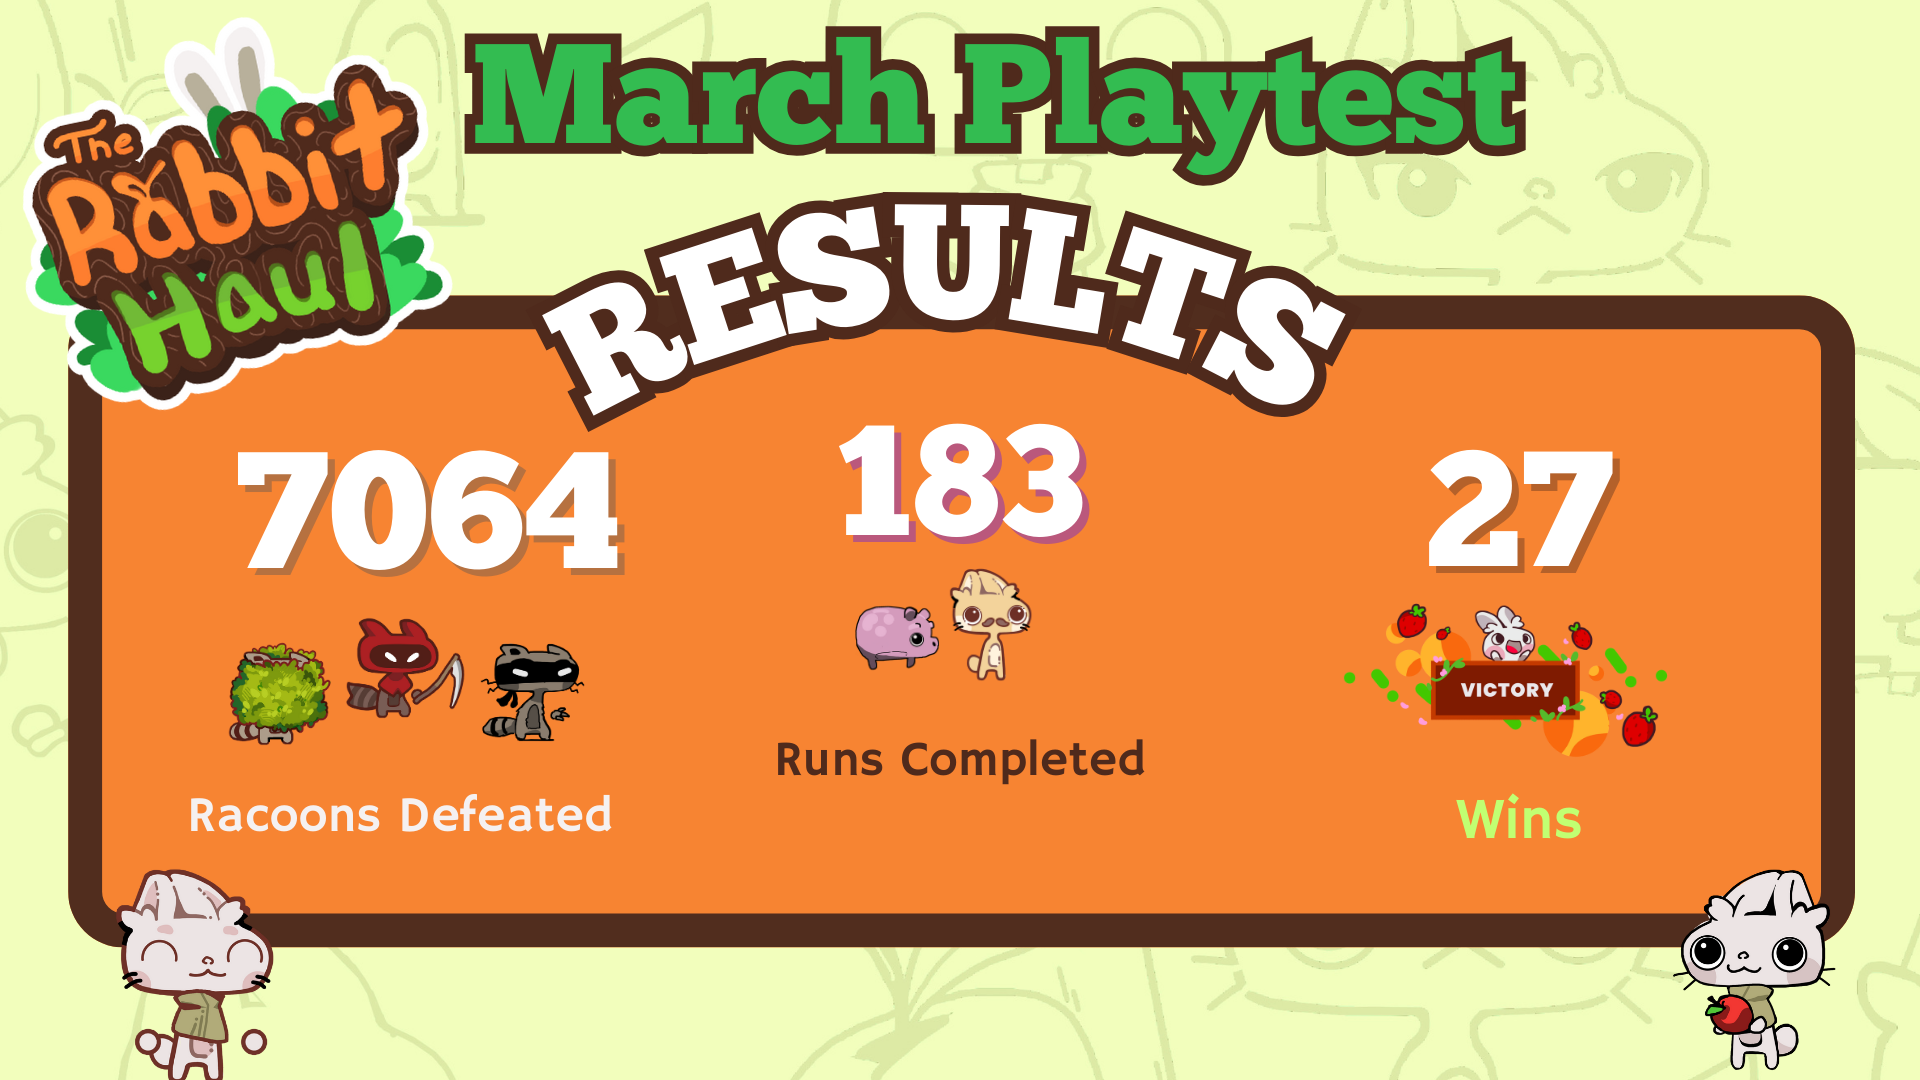 March playtest results: 7,064 raccoons defeated, 183 runs completed, 27 wins